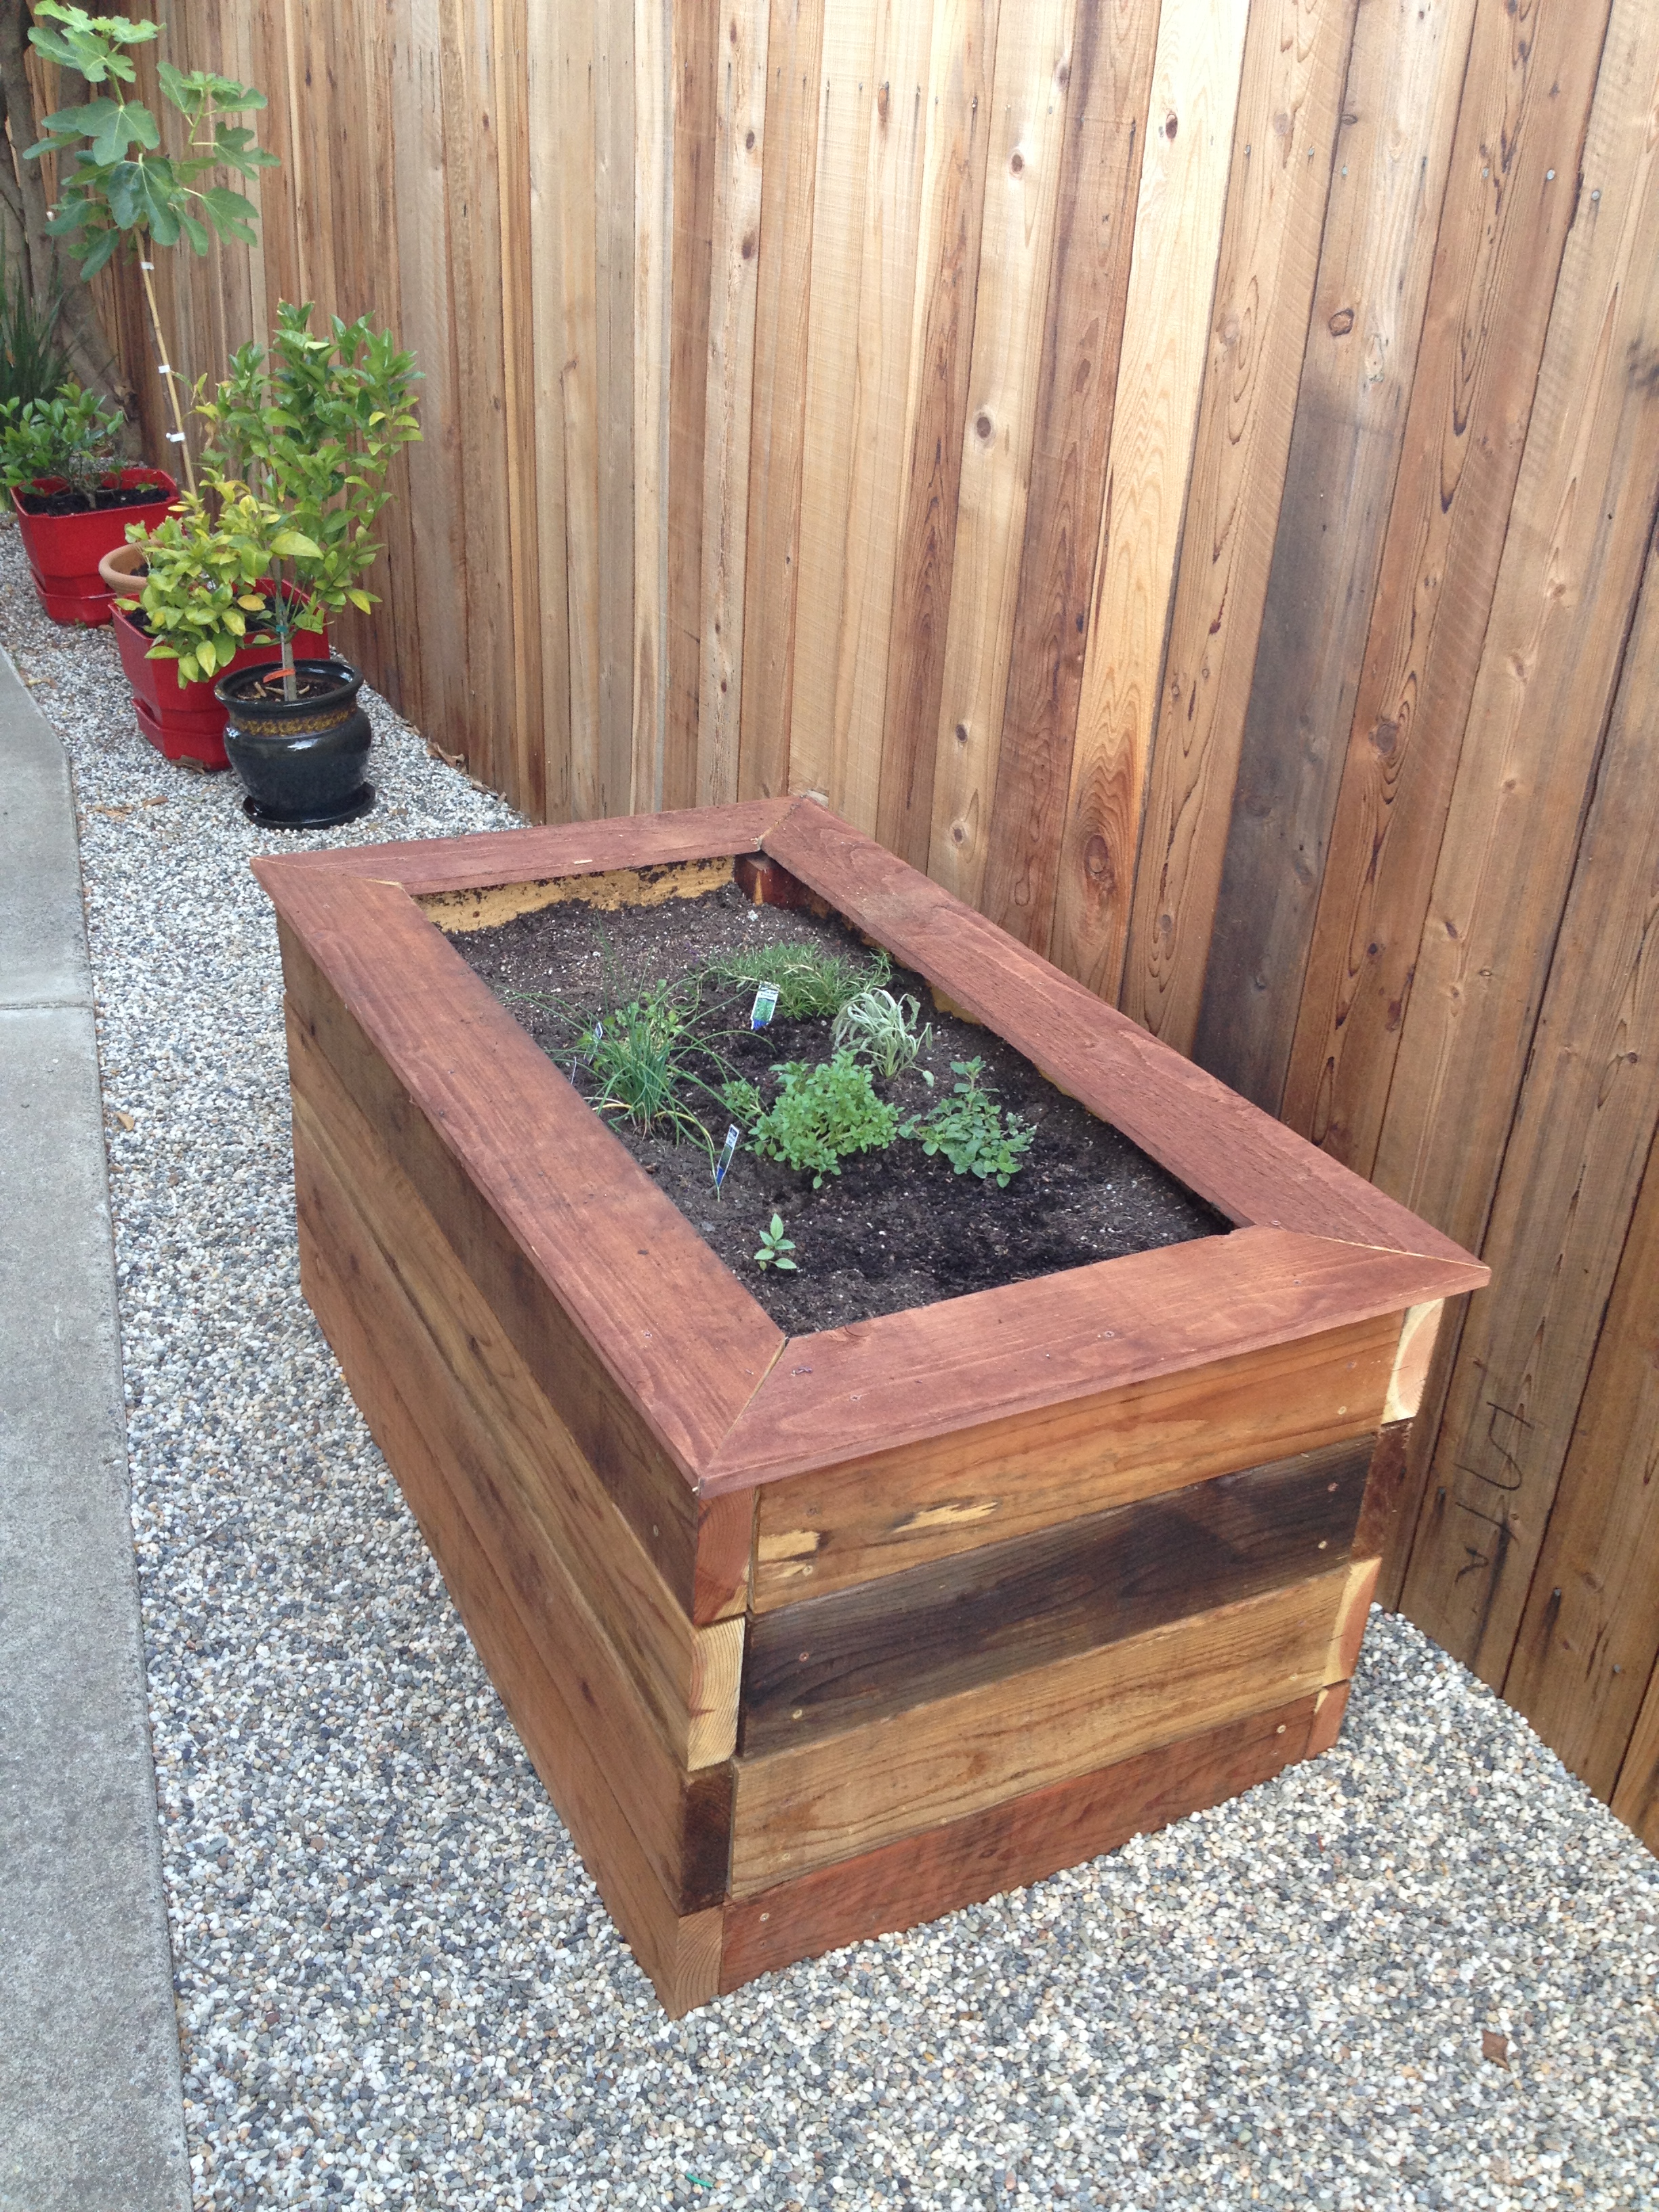 Woodworking: Raised Planter Box and Bench Casa de Wade